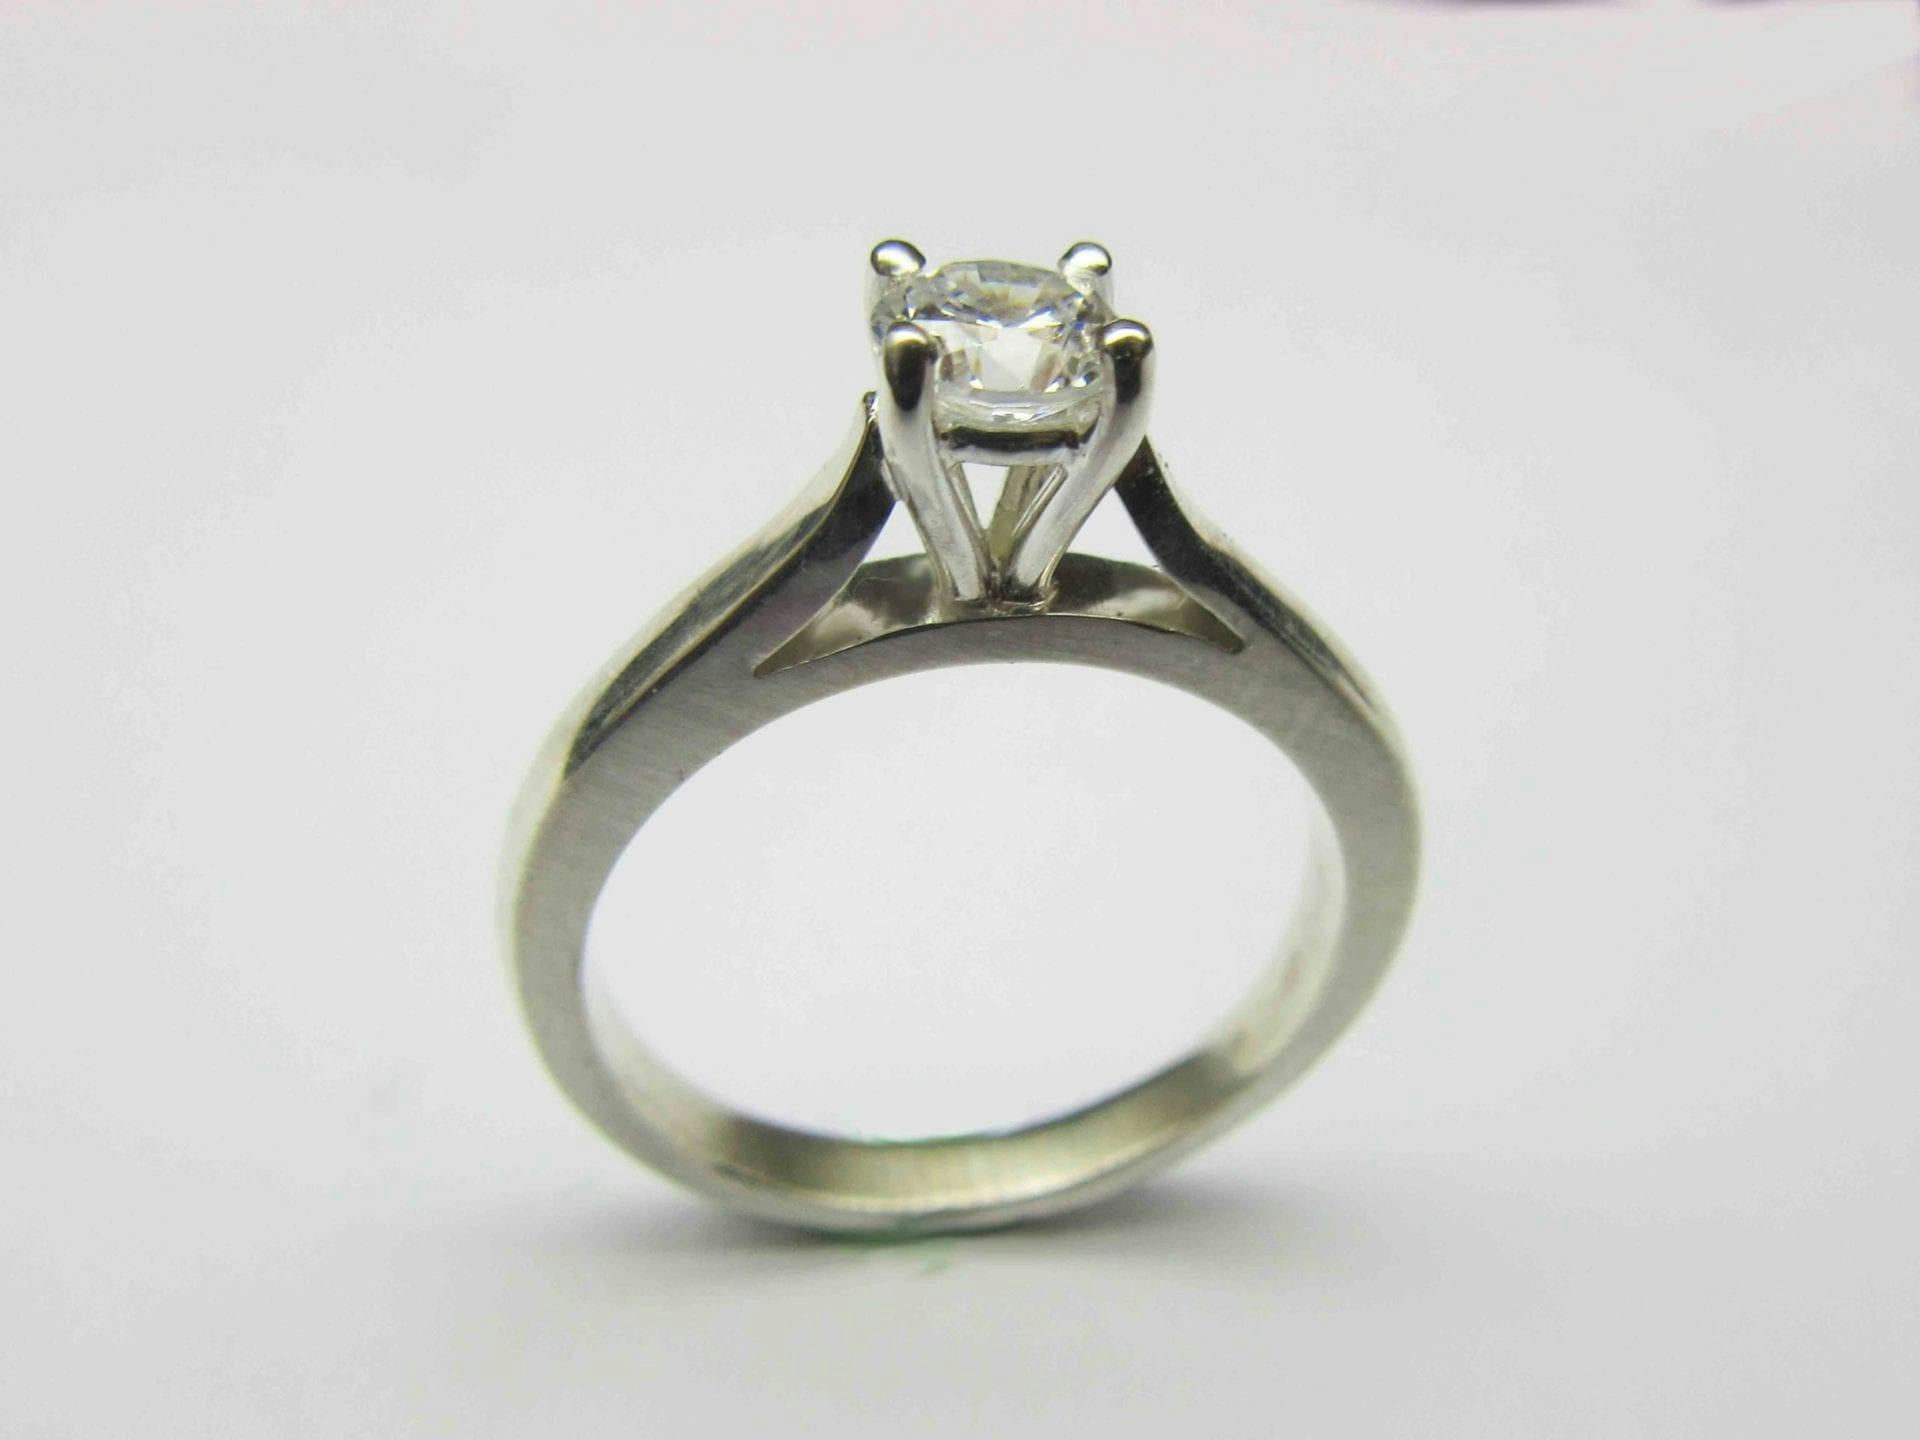 How to Make a 4-Prong Claw Setting Solitaire Ring